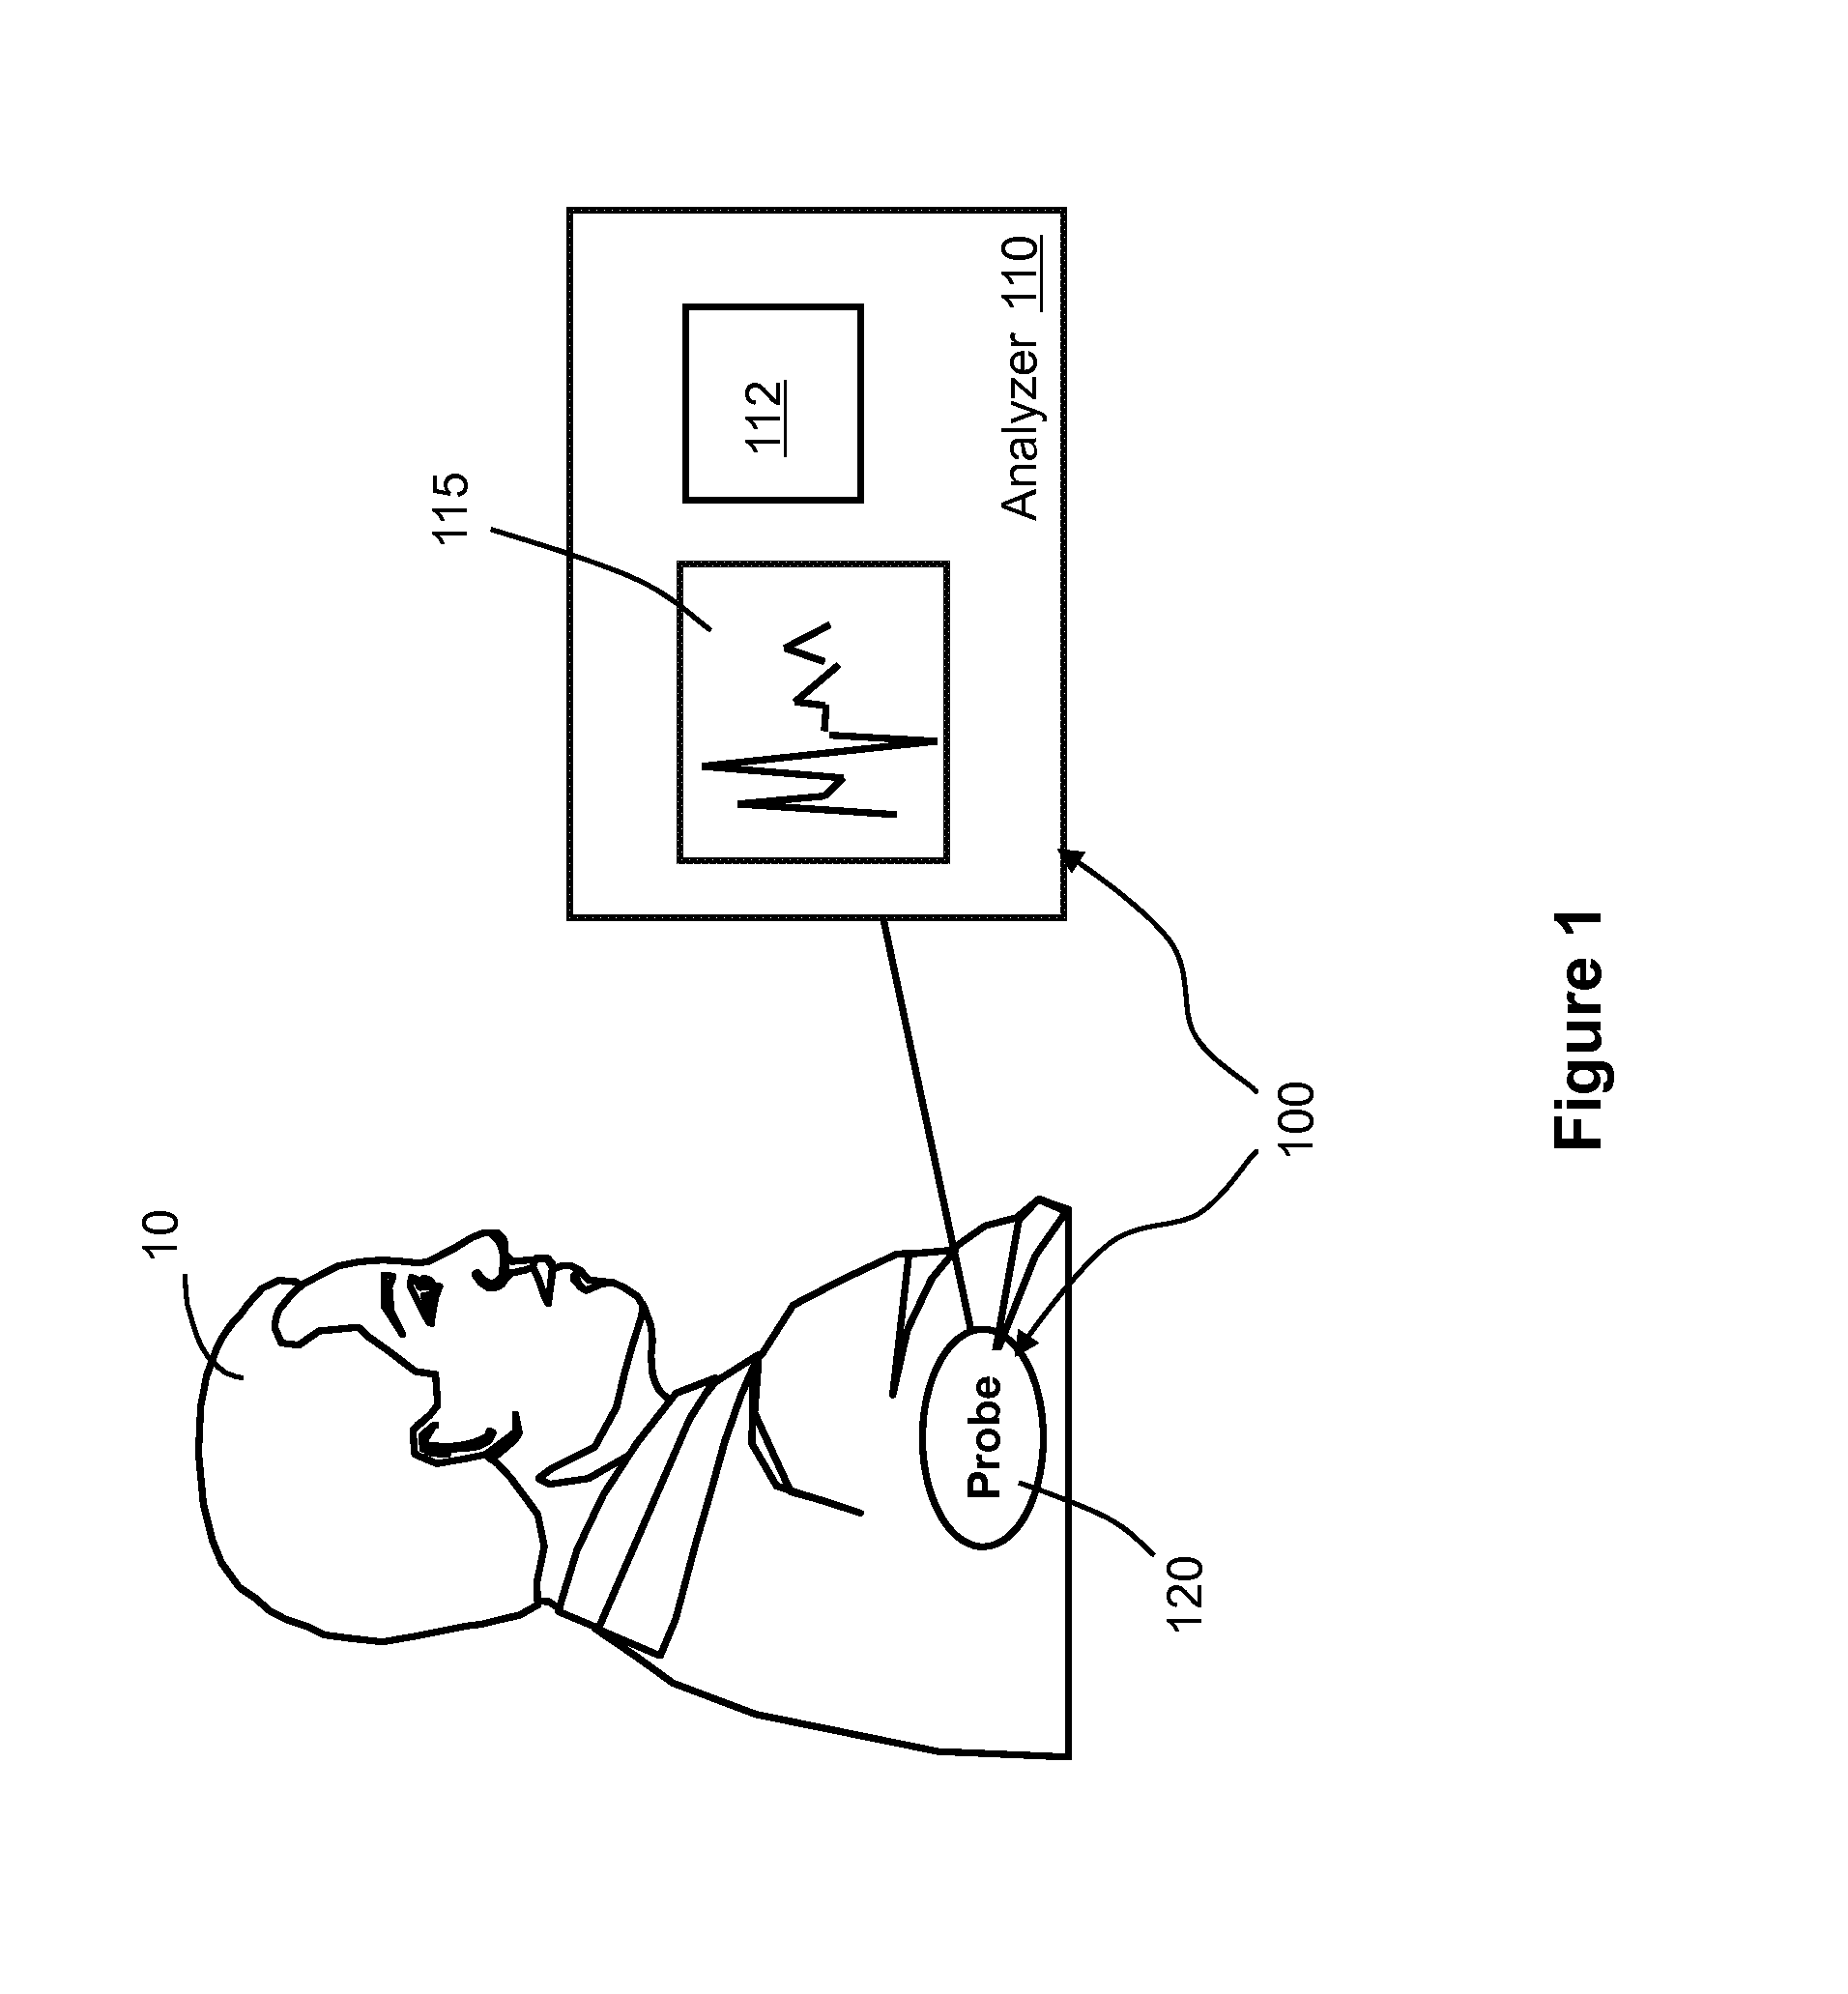 System and method for improved complex fractionated electrogram ablation